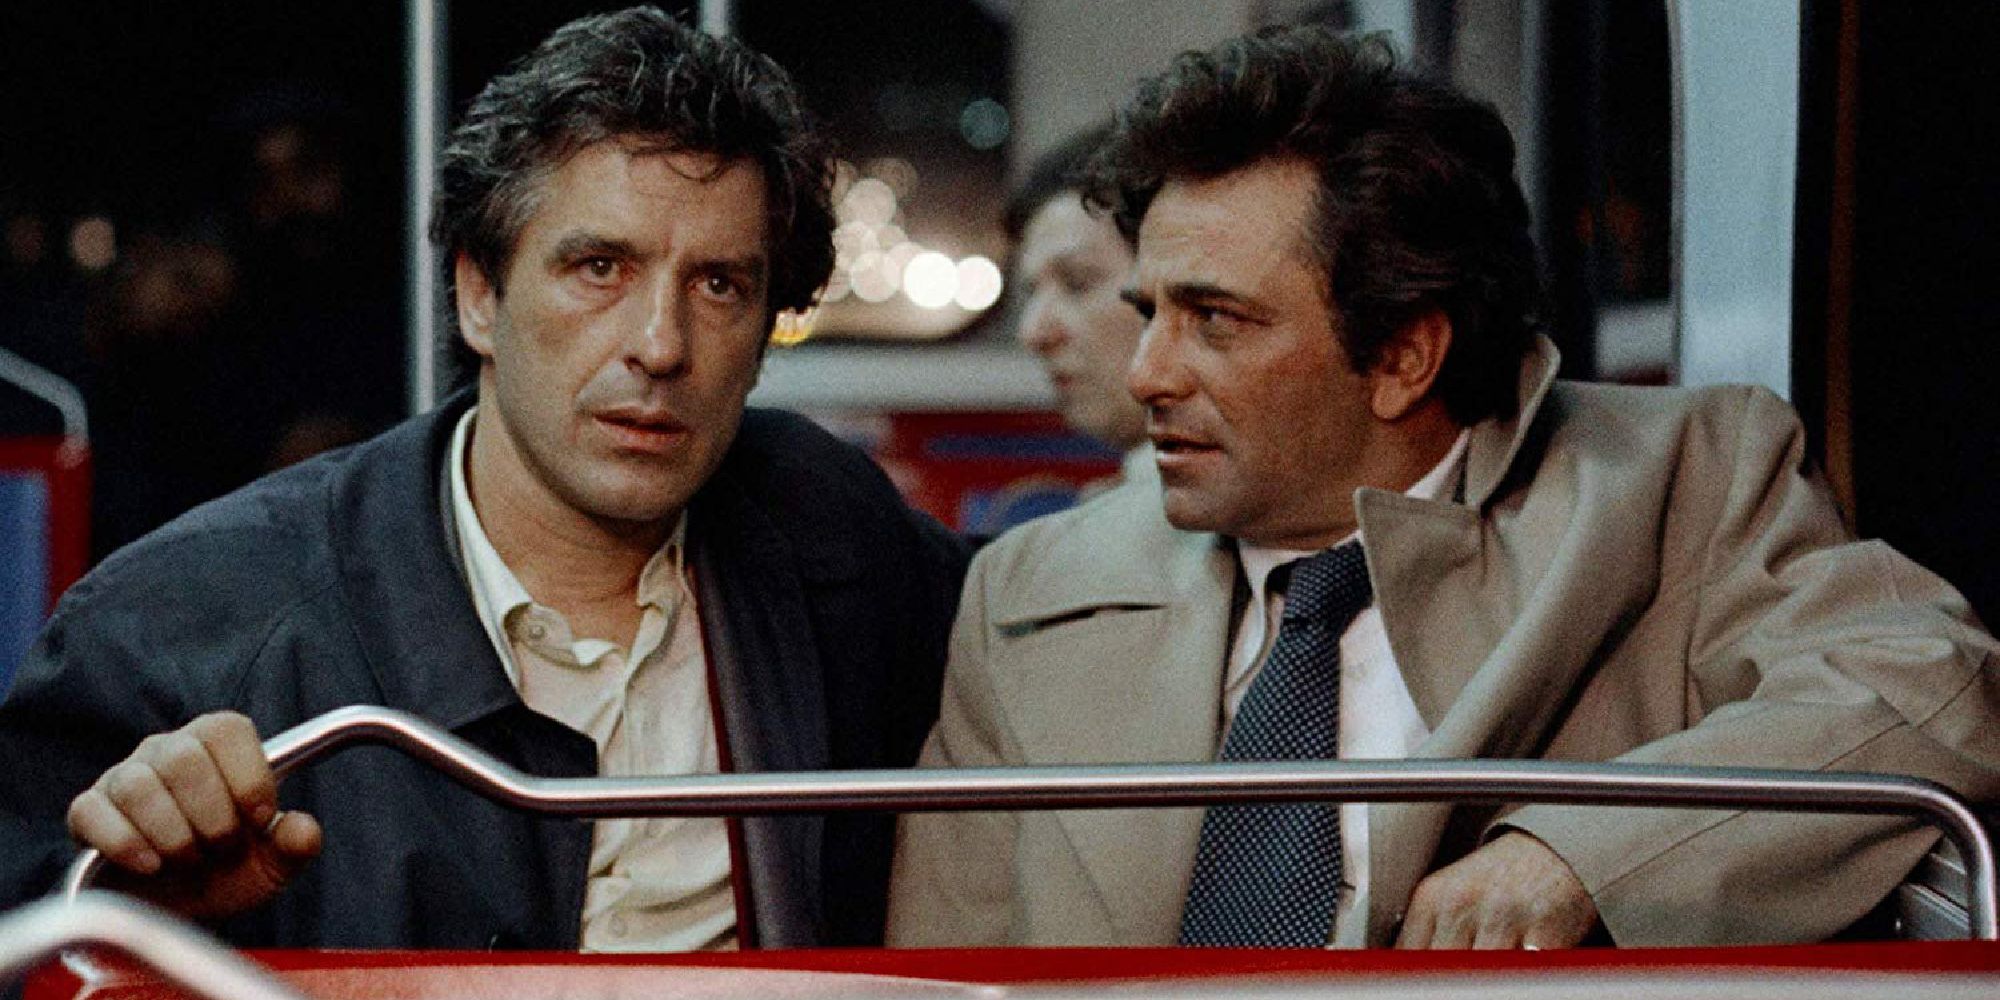 John Cassavetes and Peter Falk in Elaine May's Mikey and Nicky